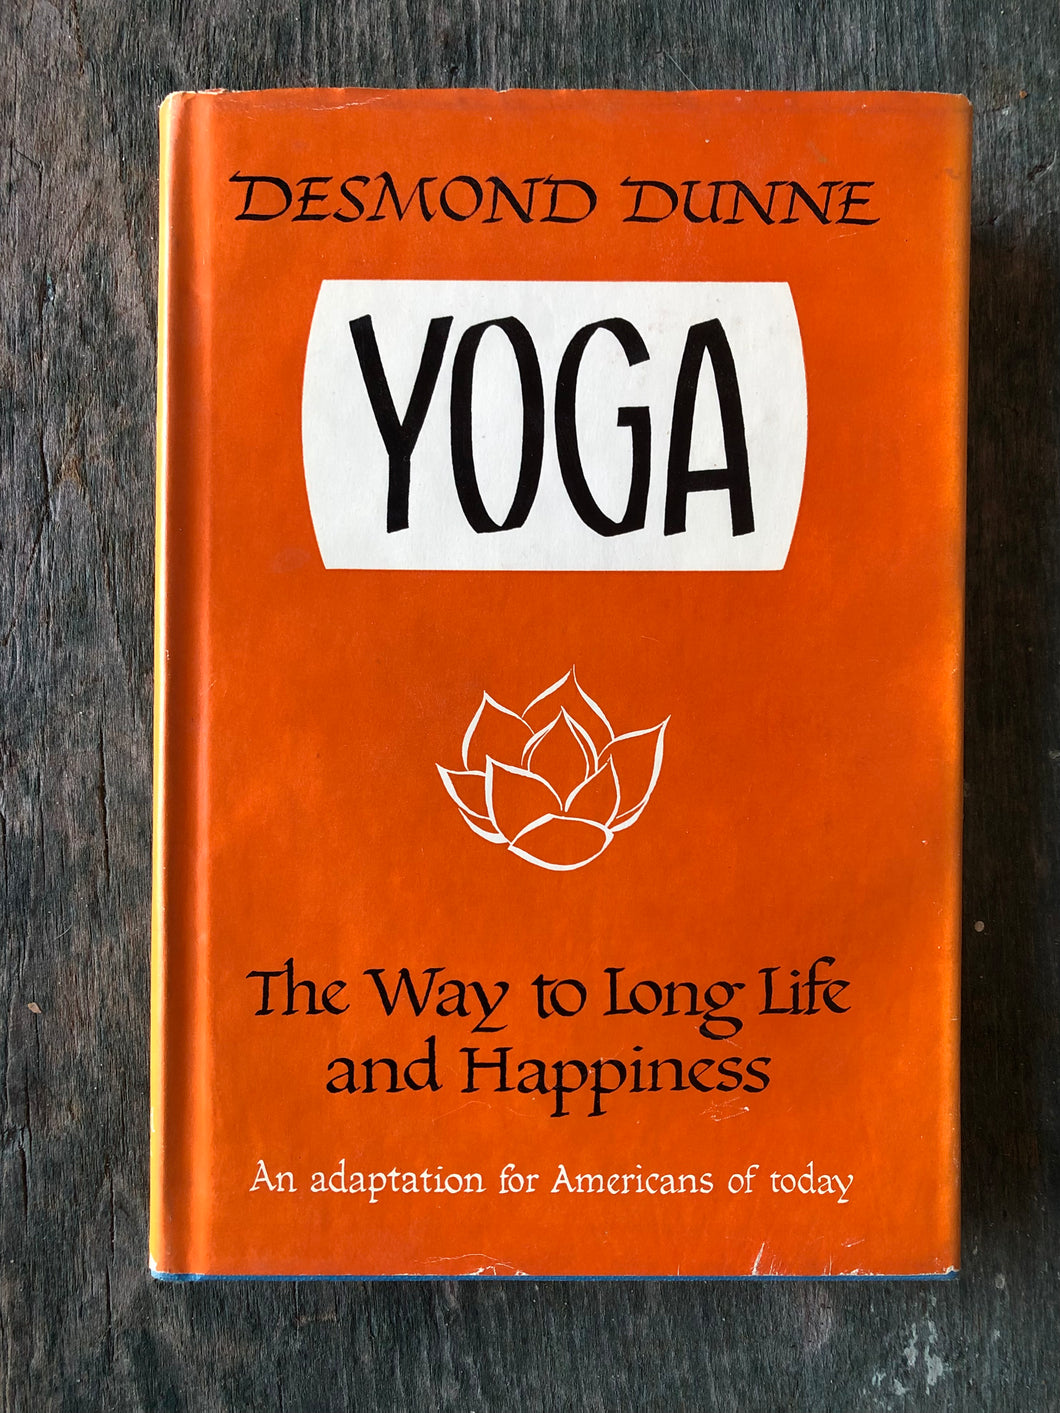 Yoga: The Way to Long Life and Happiness by Desmond Dunne